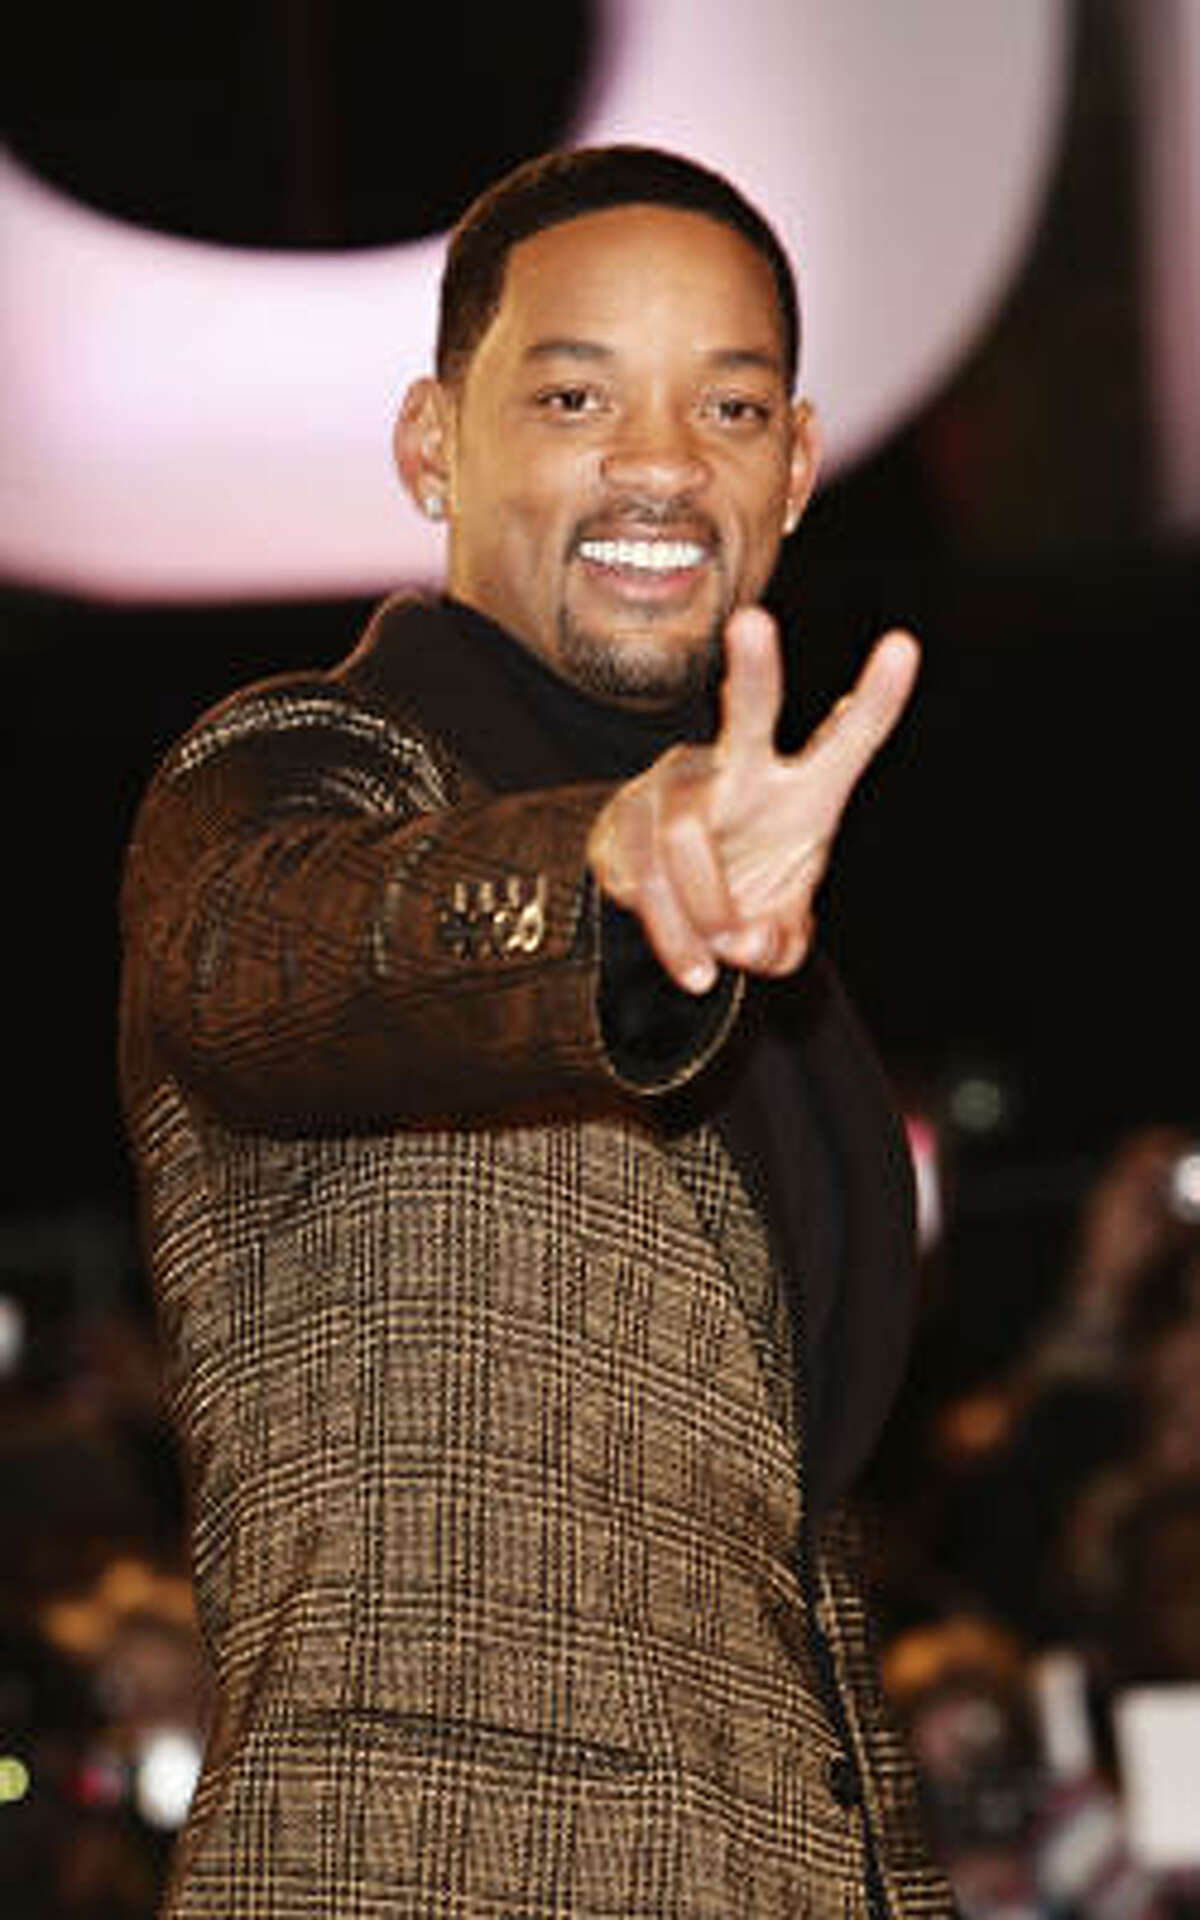 1. Will Smith scored a perfect 10.